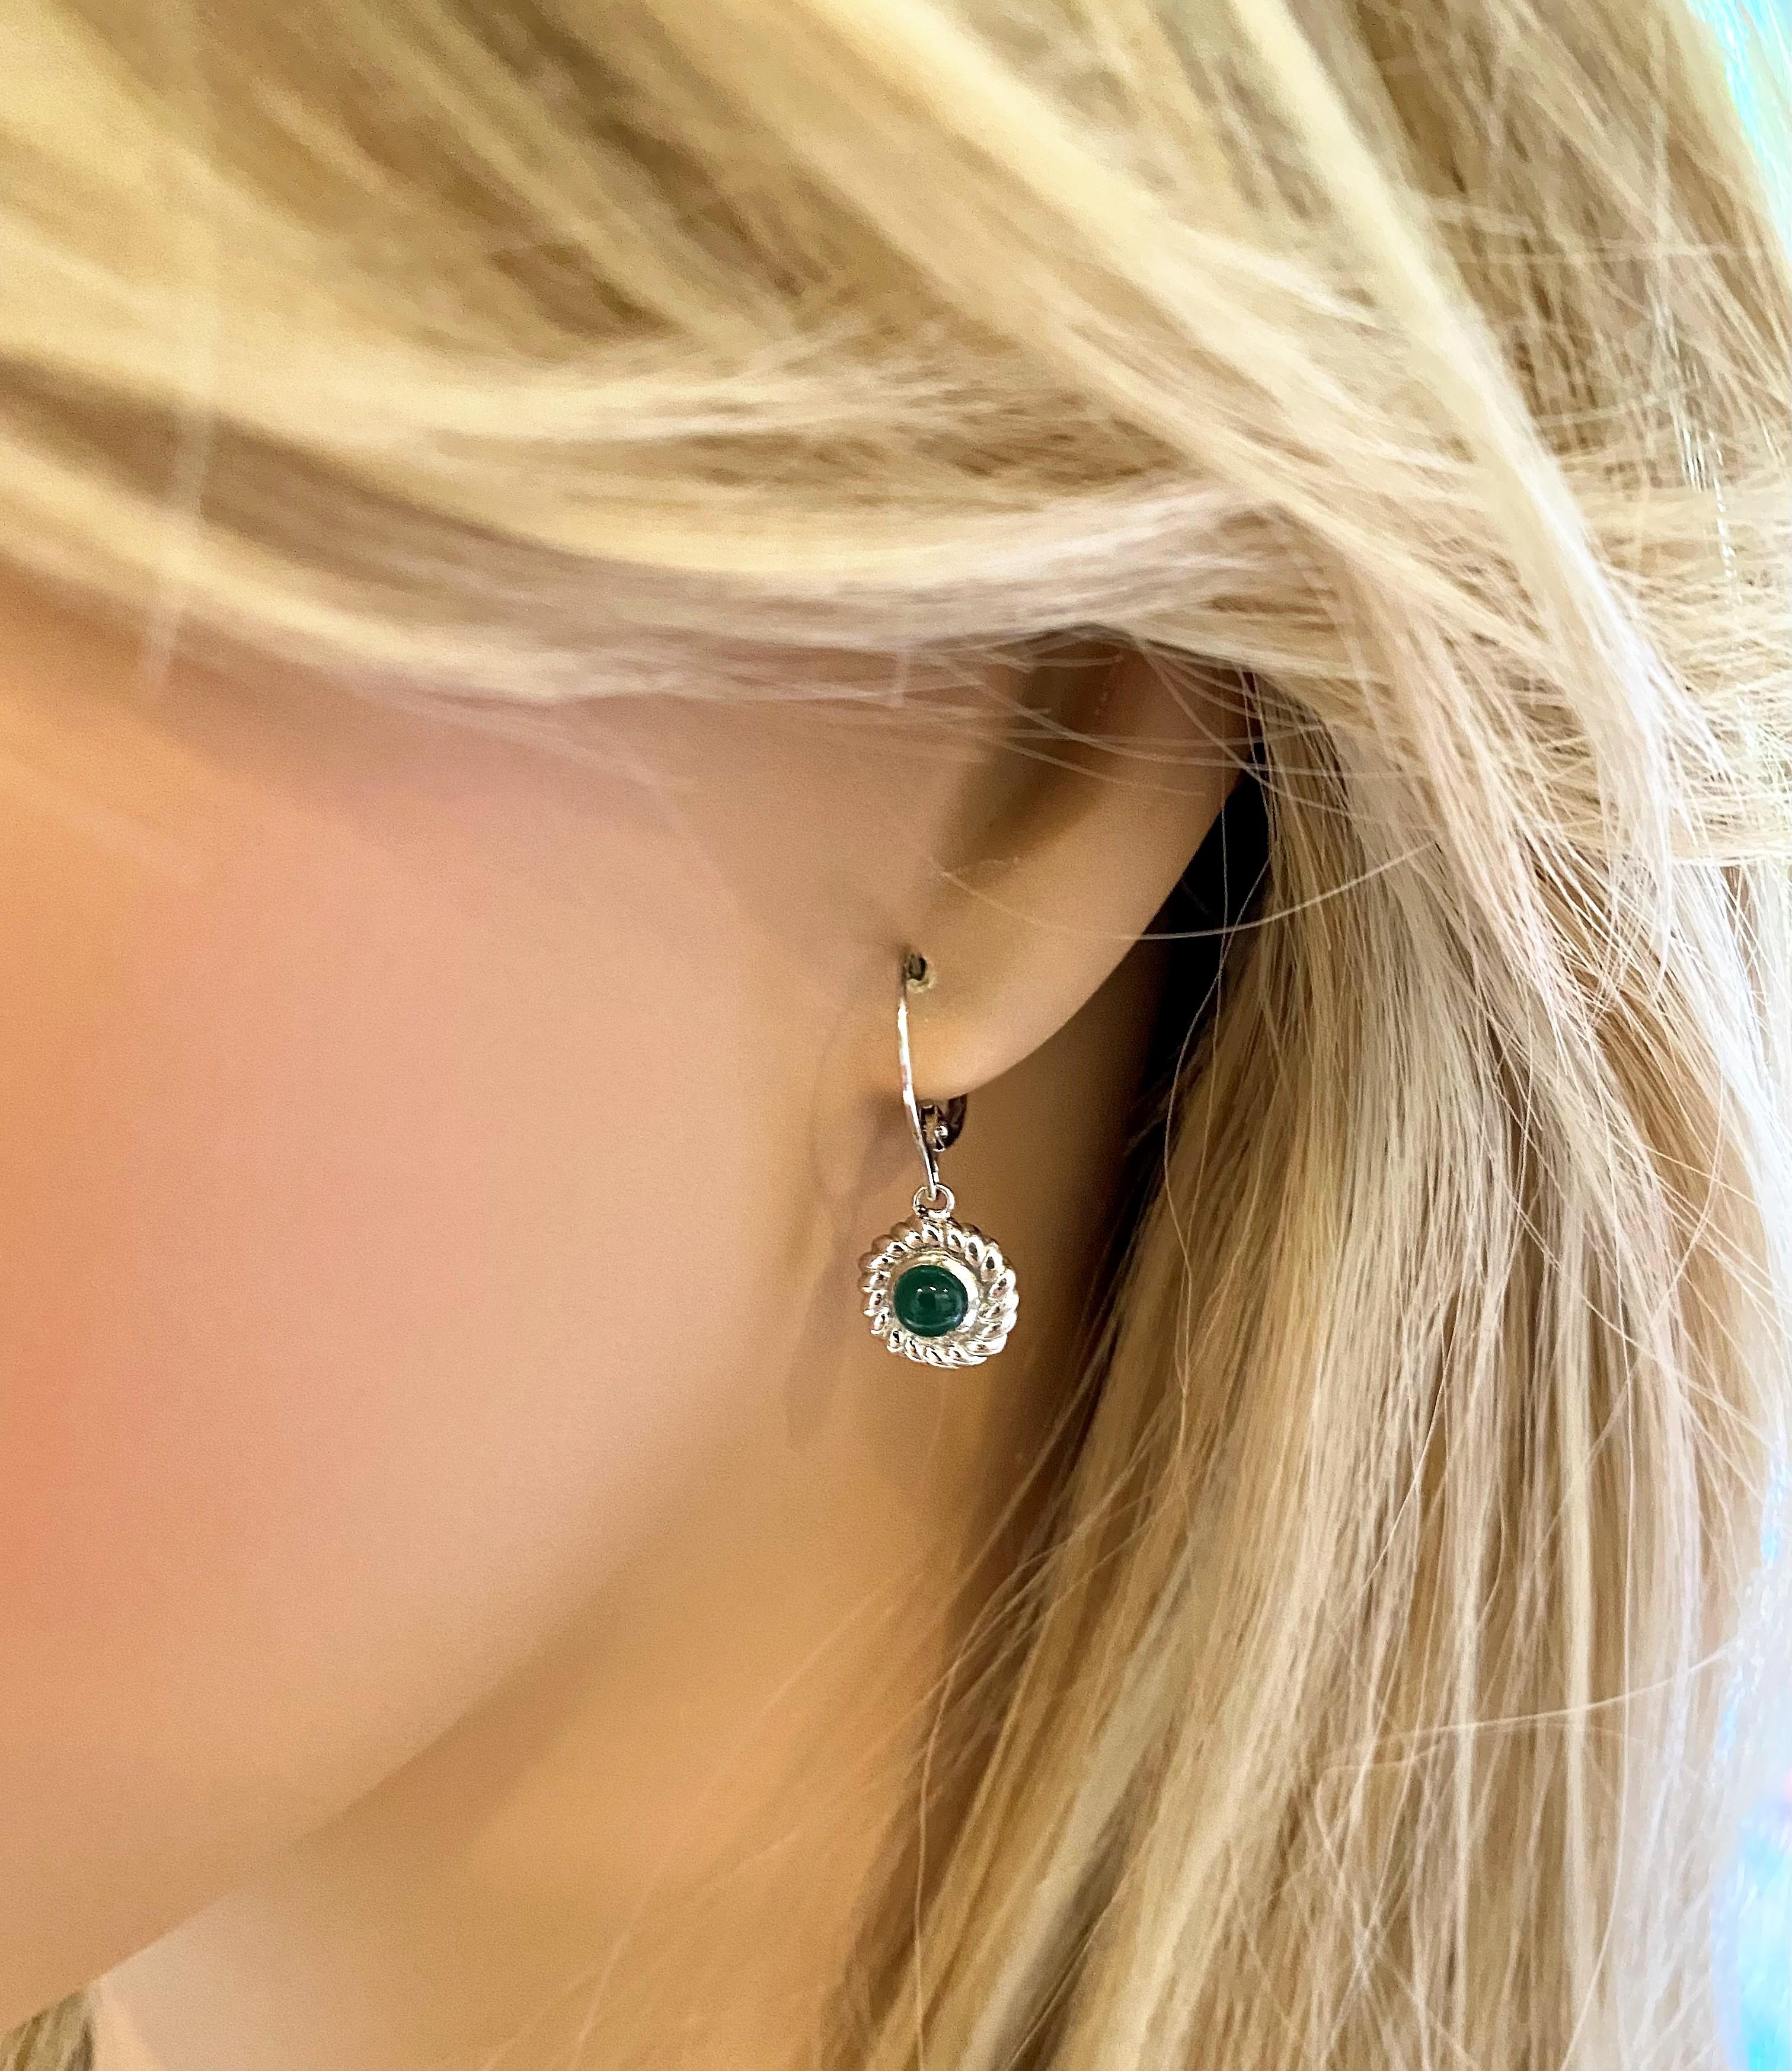 14 karats white gold braided bezel set cabochon emerald lever back earrings
Cabochon emeralds weighing 1.70 carat
Emeralds measuring 4.5 millimeters
Emerald hue tone color is of grass green
Earrings are hanging of a white gold lever backs
Handmade